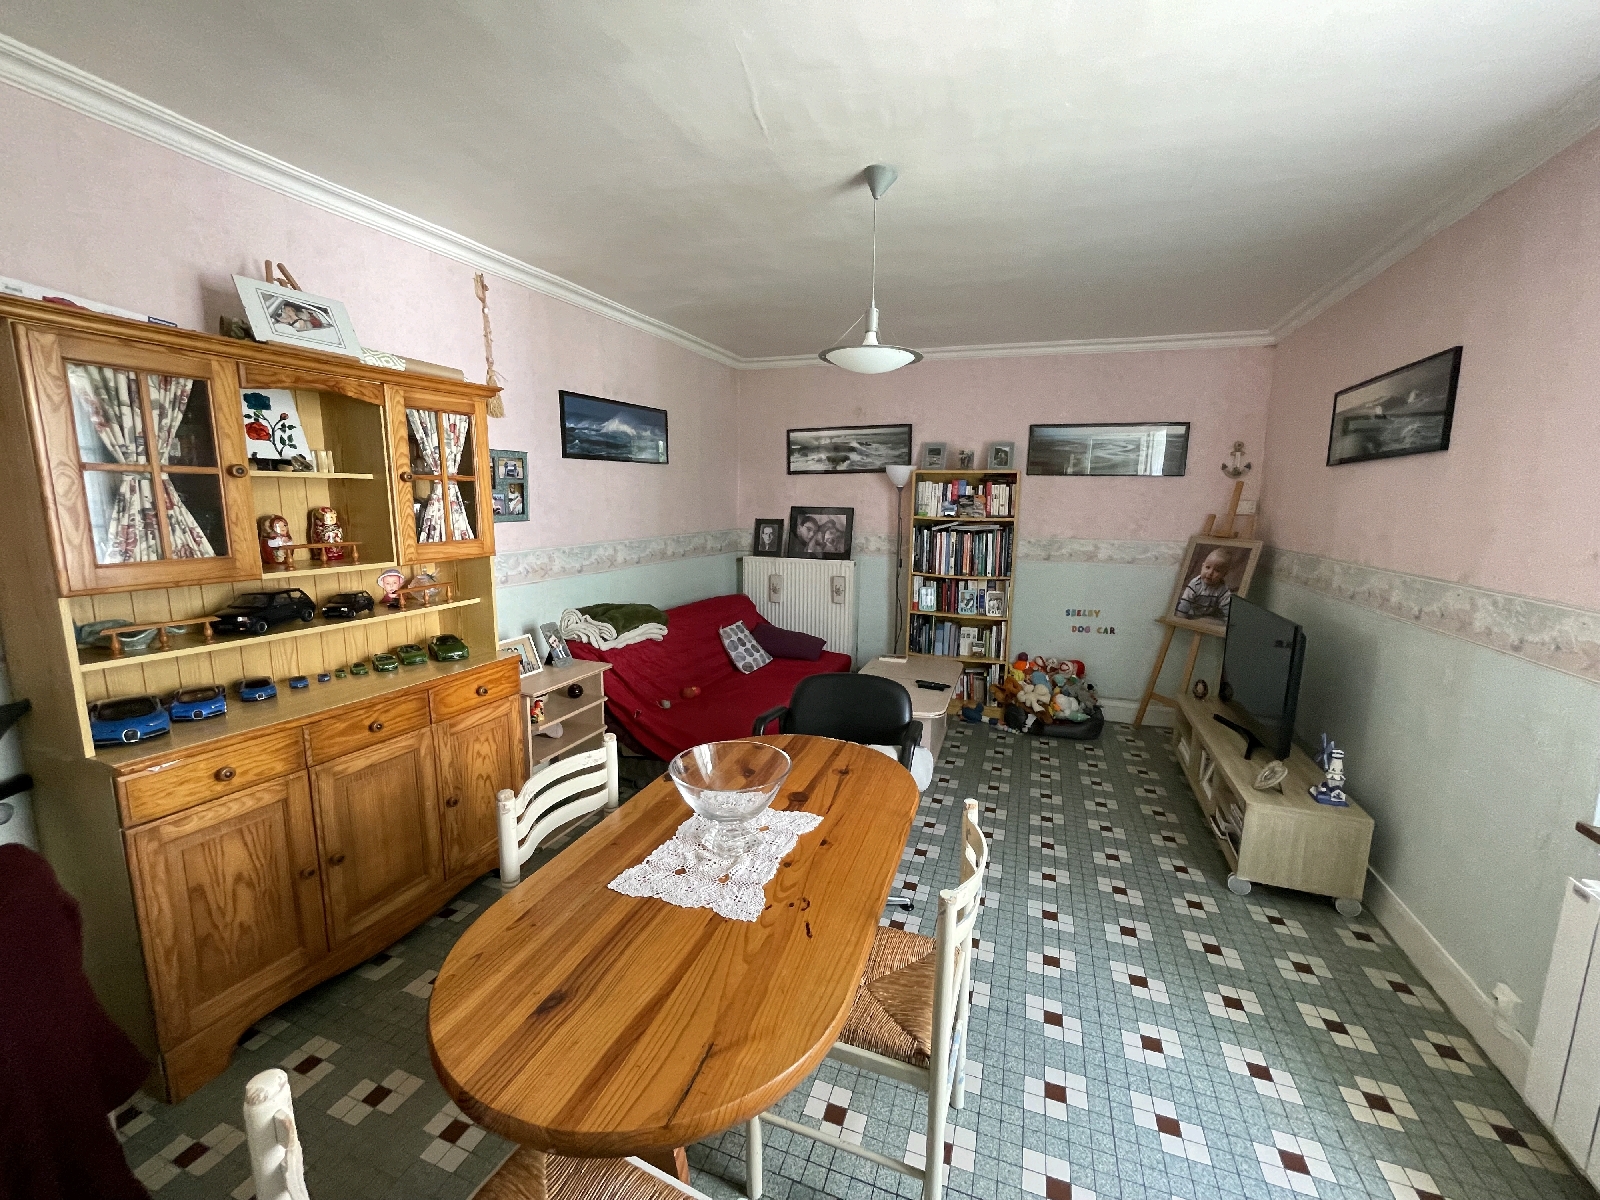 Main Photo of a 2 bedroom  Town House for sale